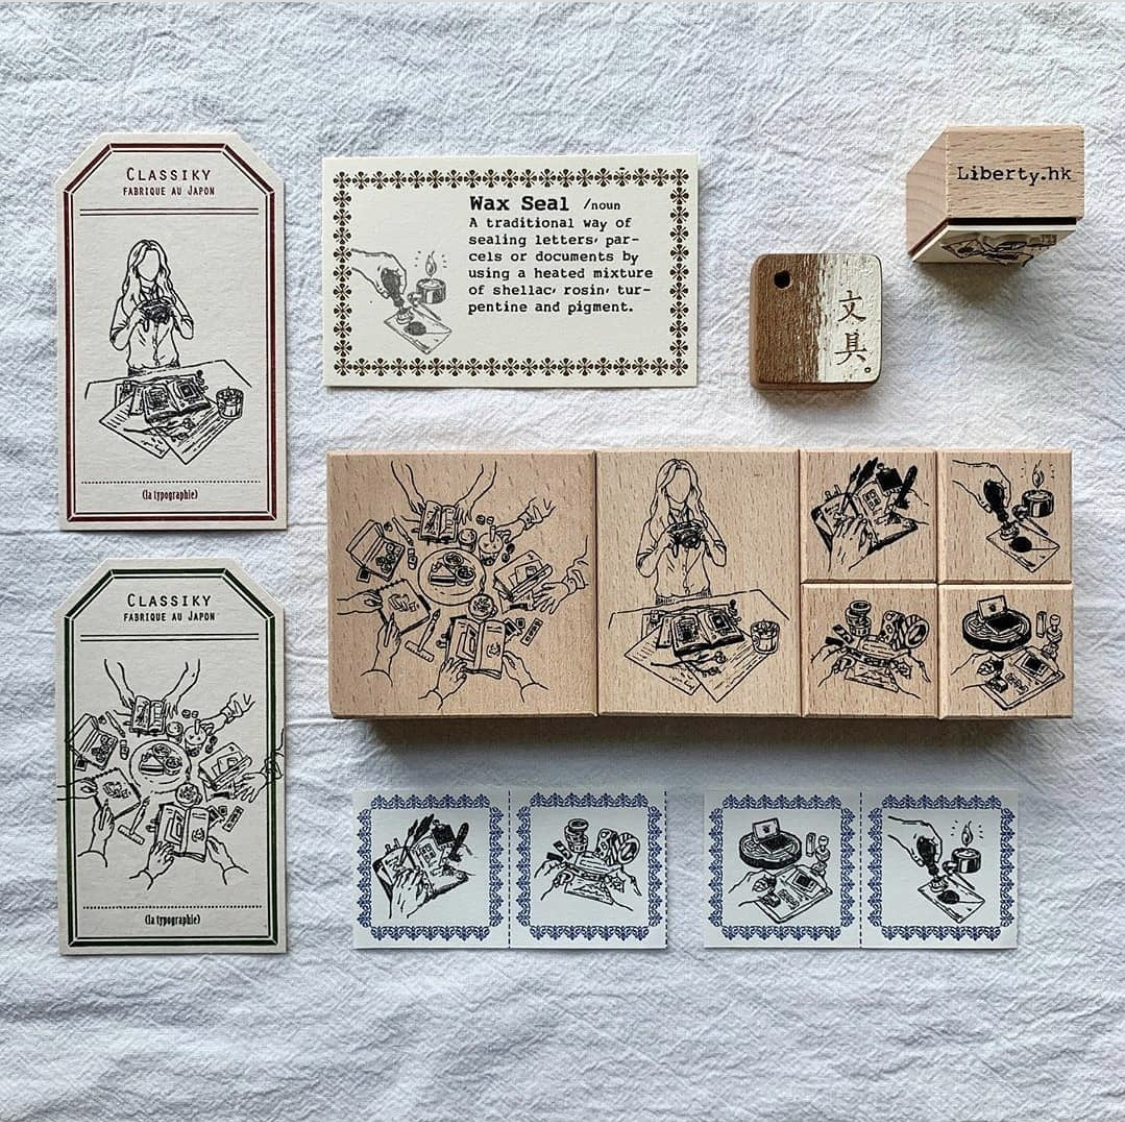 Some of the unique rubber stamps you can find at Cafe Analog